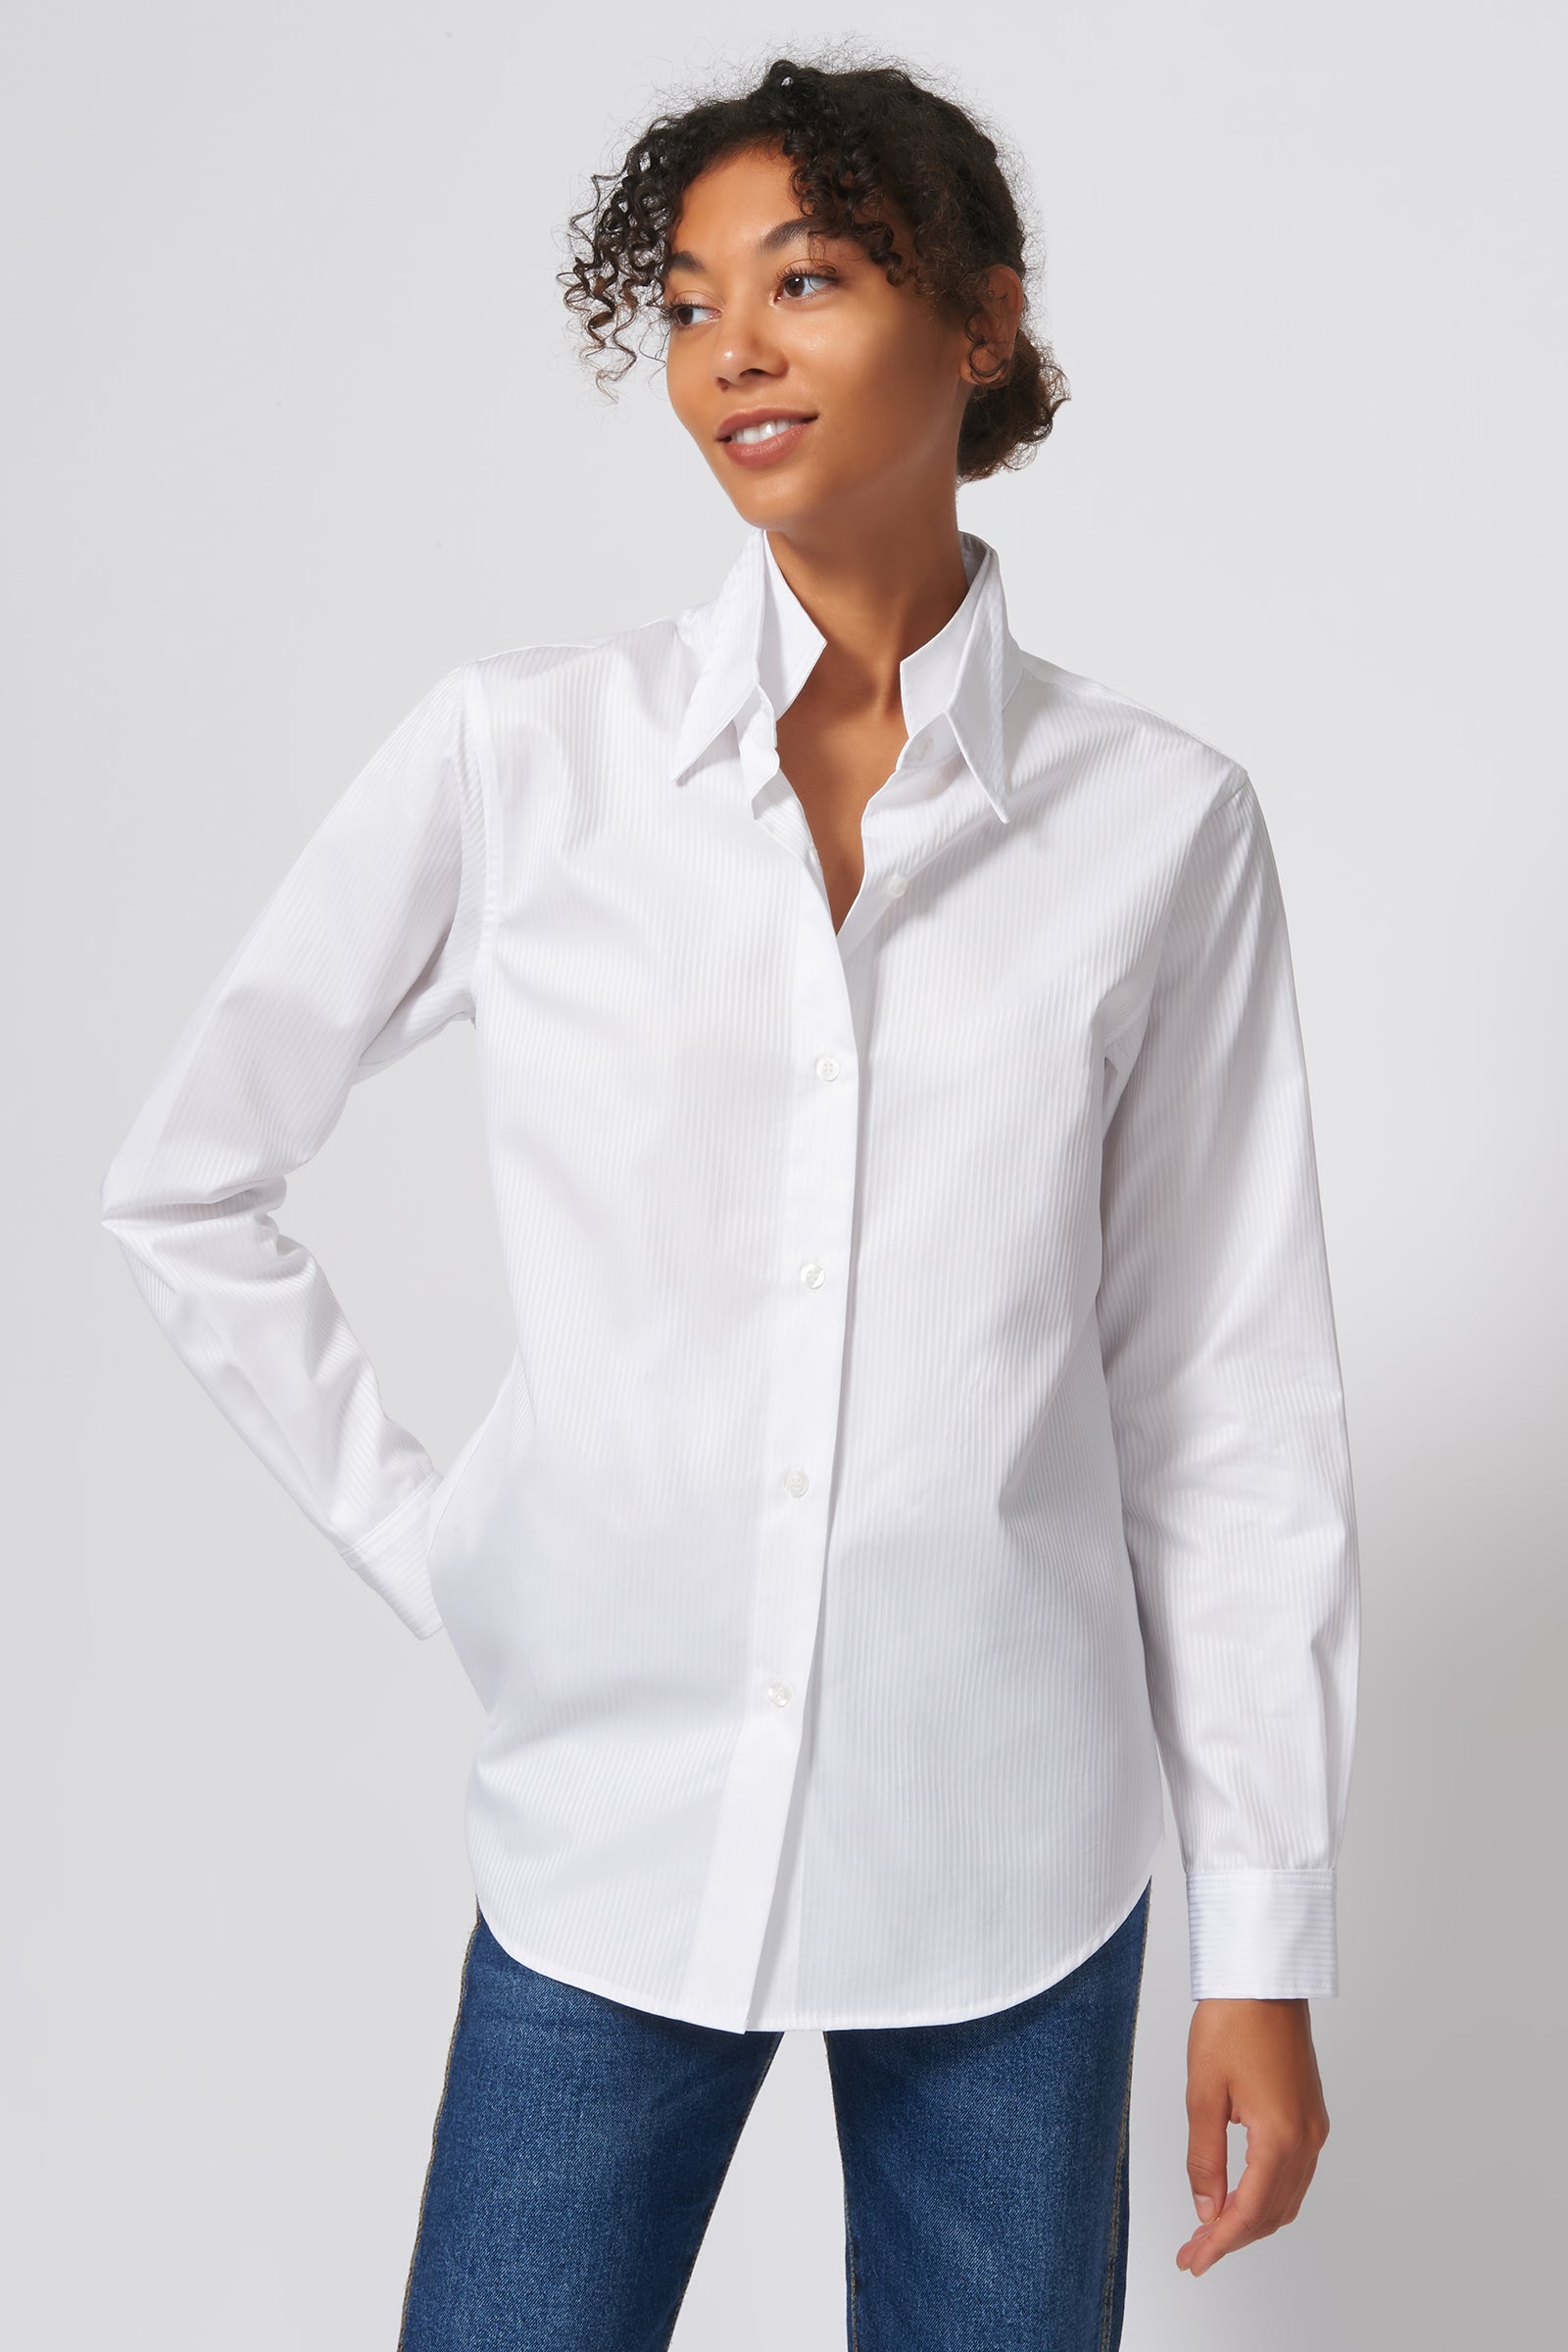 Double Collar Shirt in White Satin Stripe Made From 100% Cotton – KAL ...